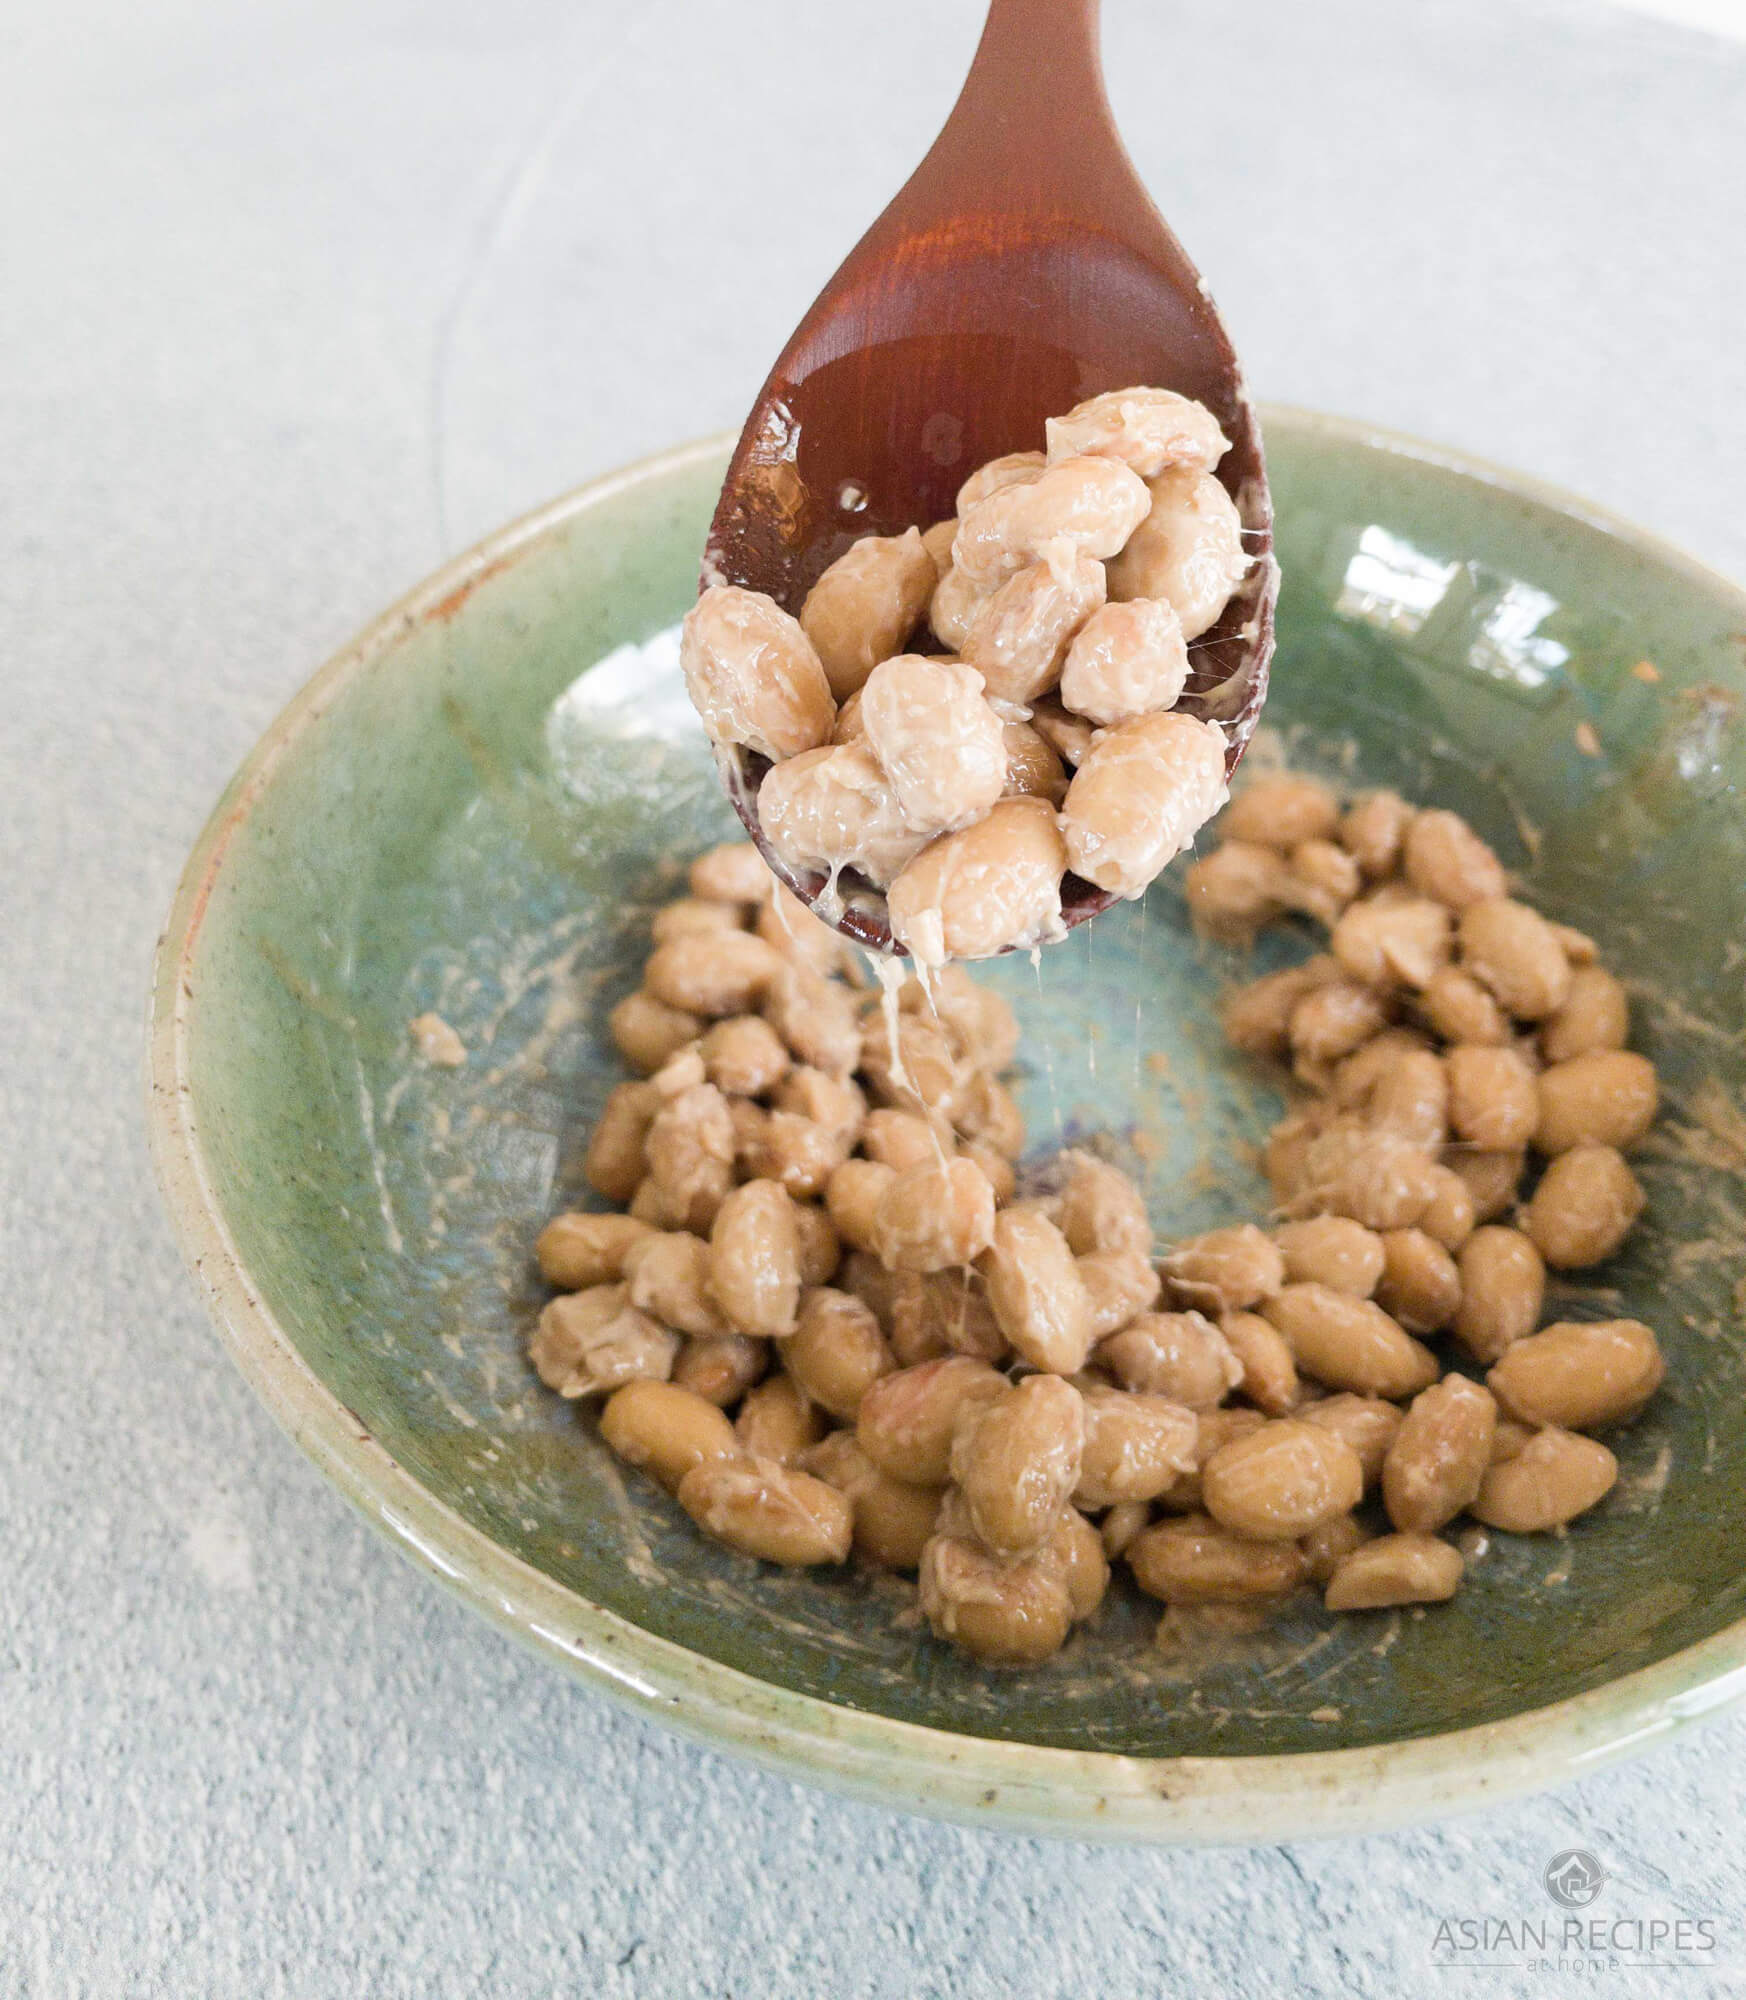 A spoonful of slimy natto (fermented soybeans).